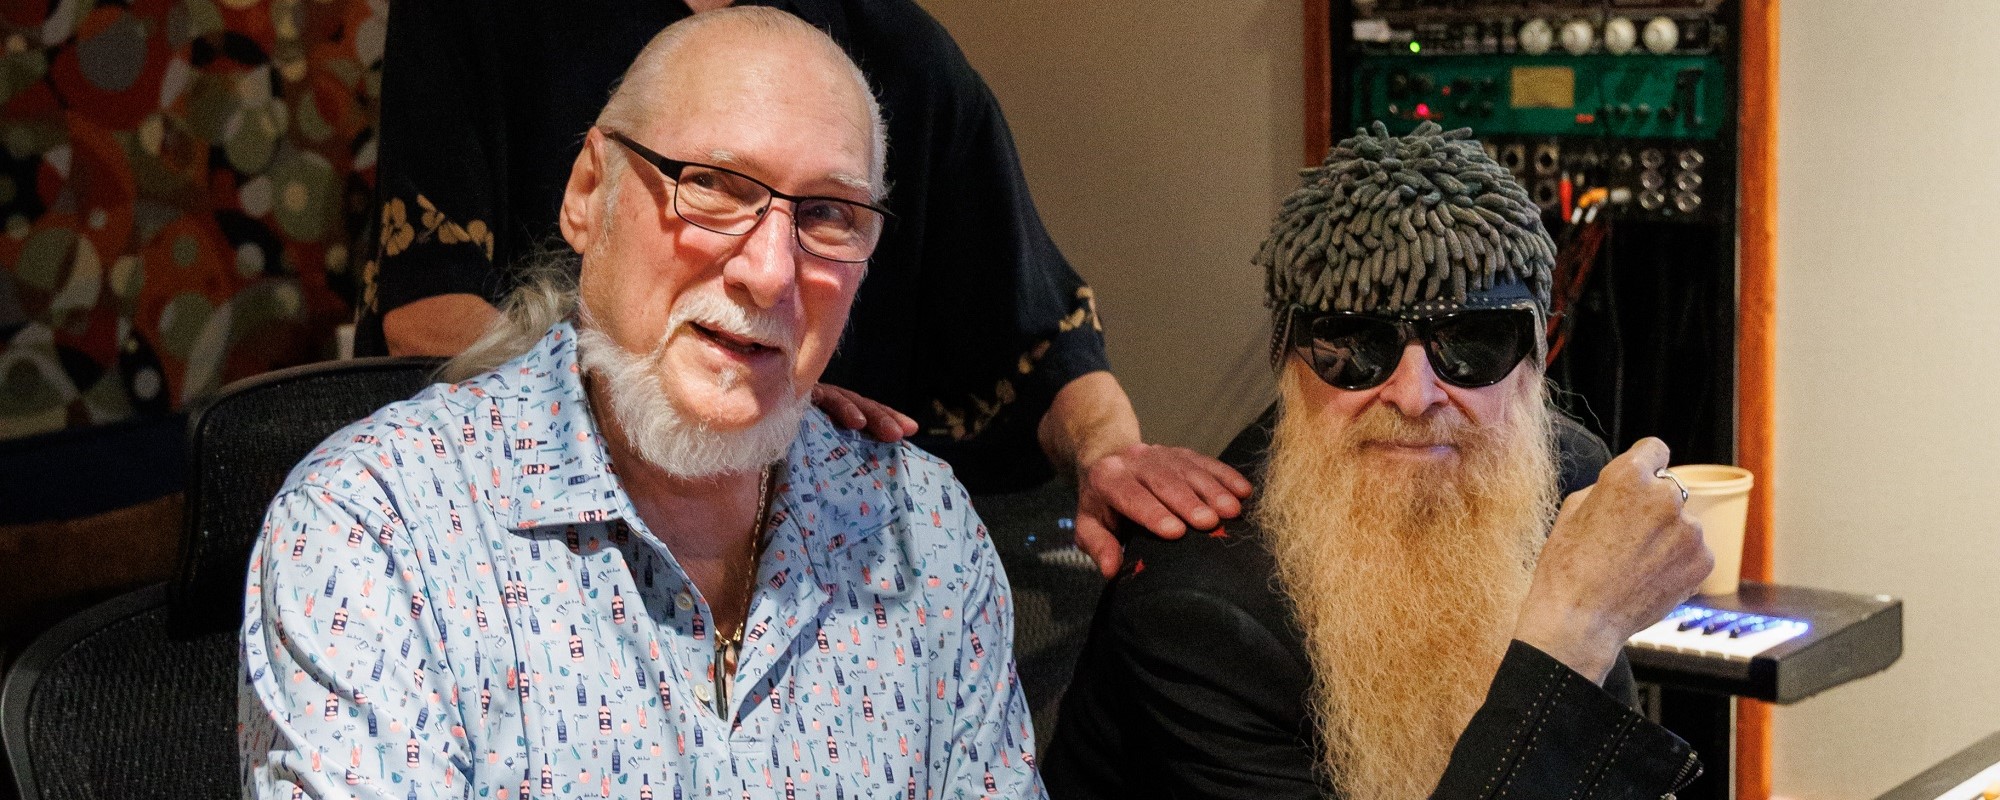 Guitar Legend Steve Cropper Releasing New Album, ‘Friendlytown,’ Featuring Queen’s Brian May and ZZ Top’s Billy Gibbons